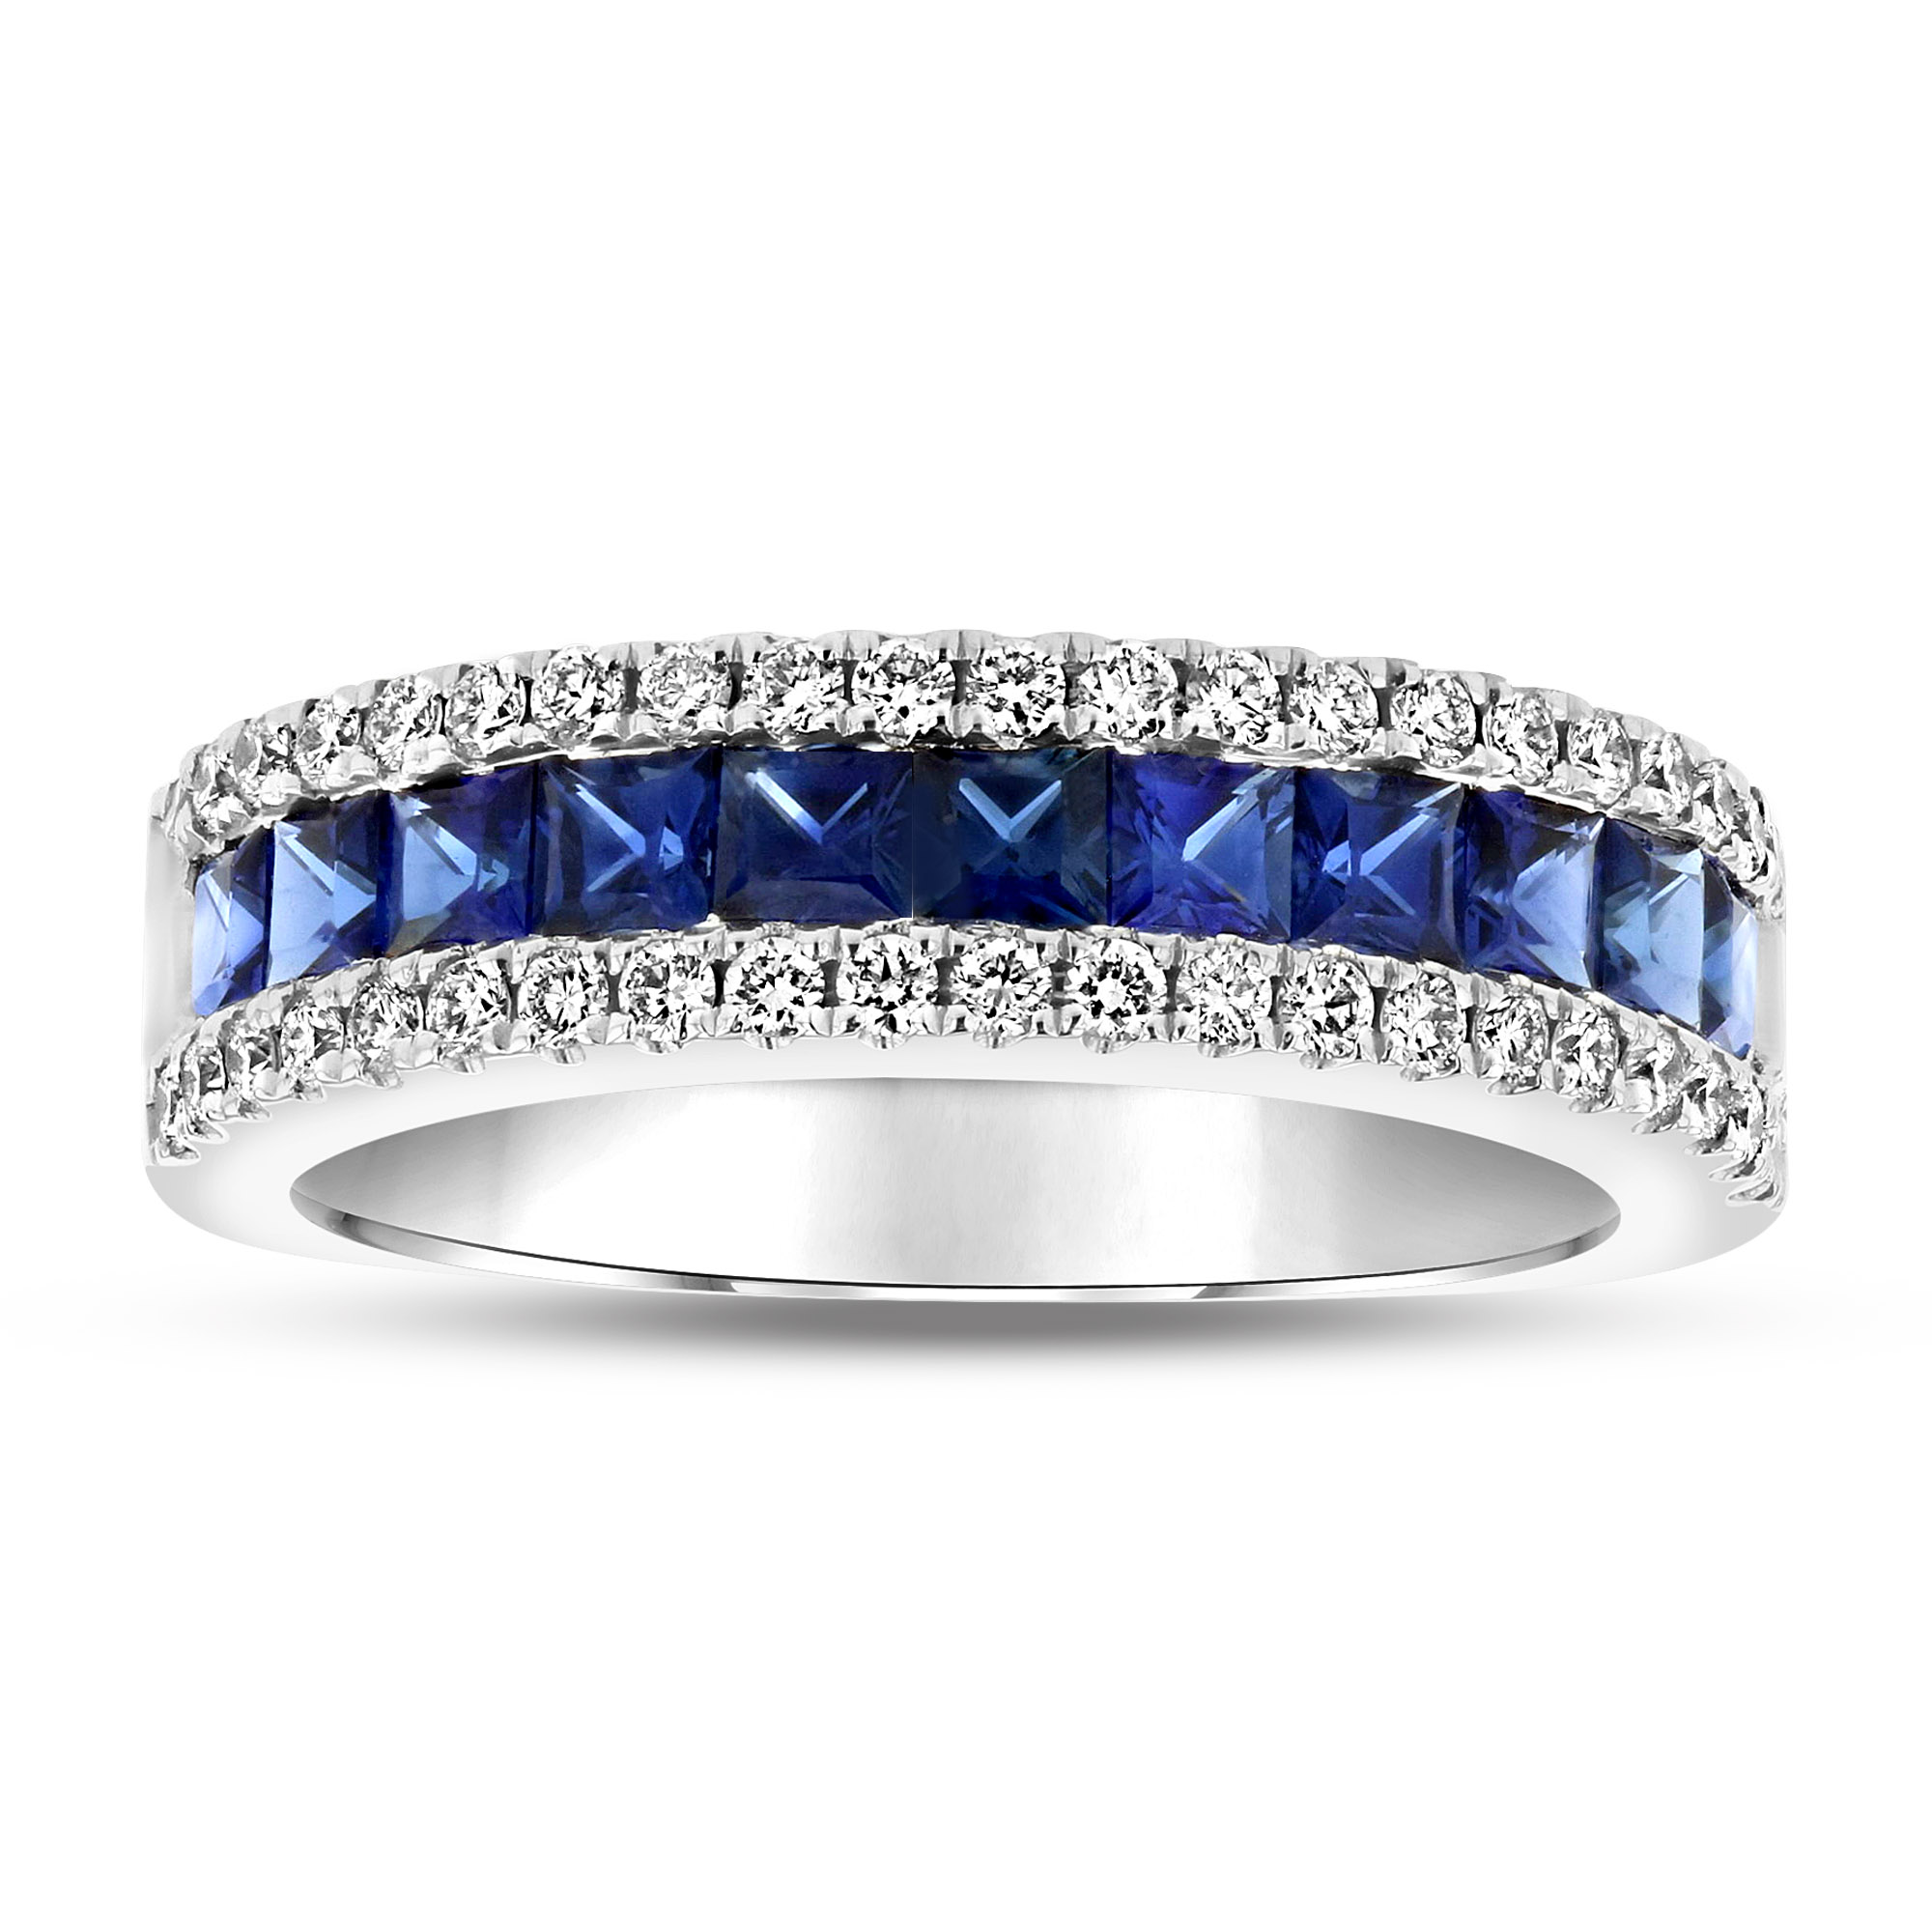 View 1.42ctw Diamond and Sapphire Ring in 18k White Gold